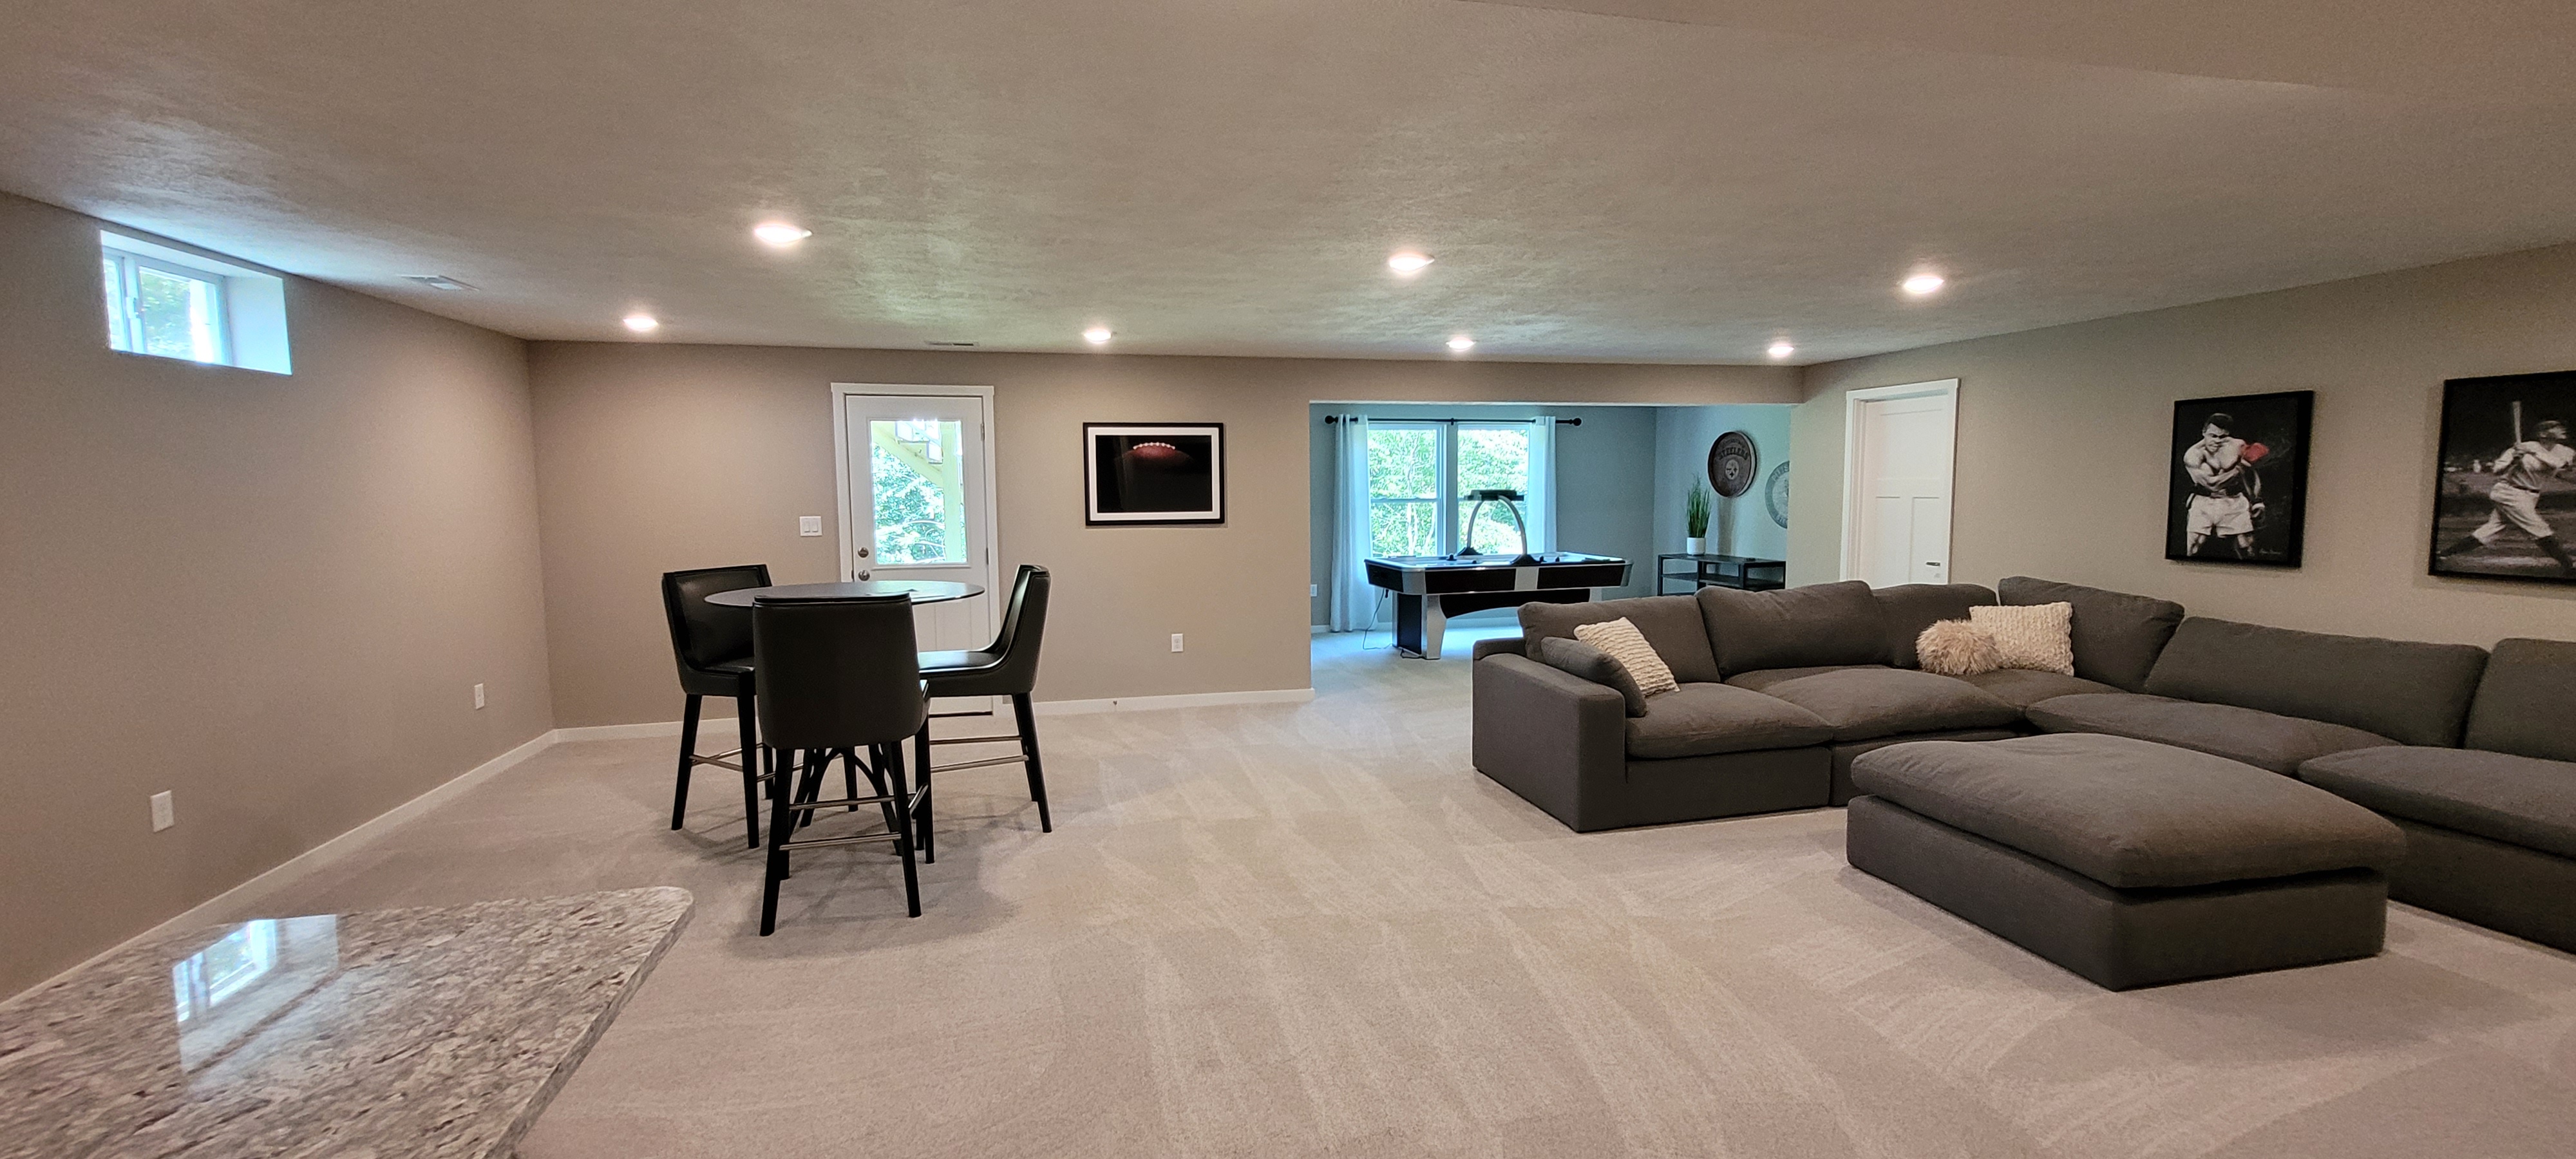 Finished basement of a new home for sale in Imperial